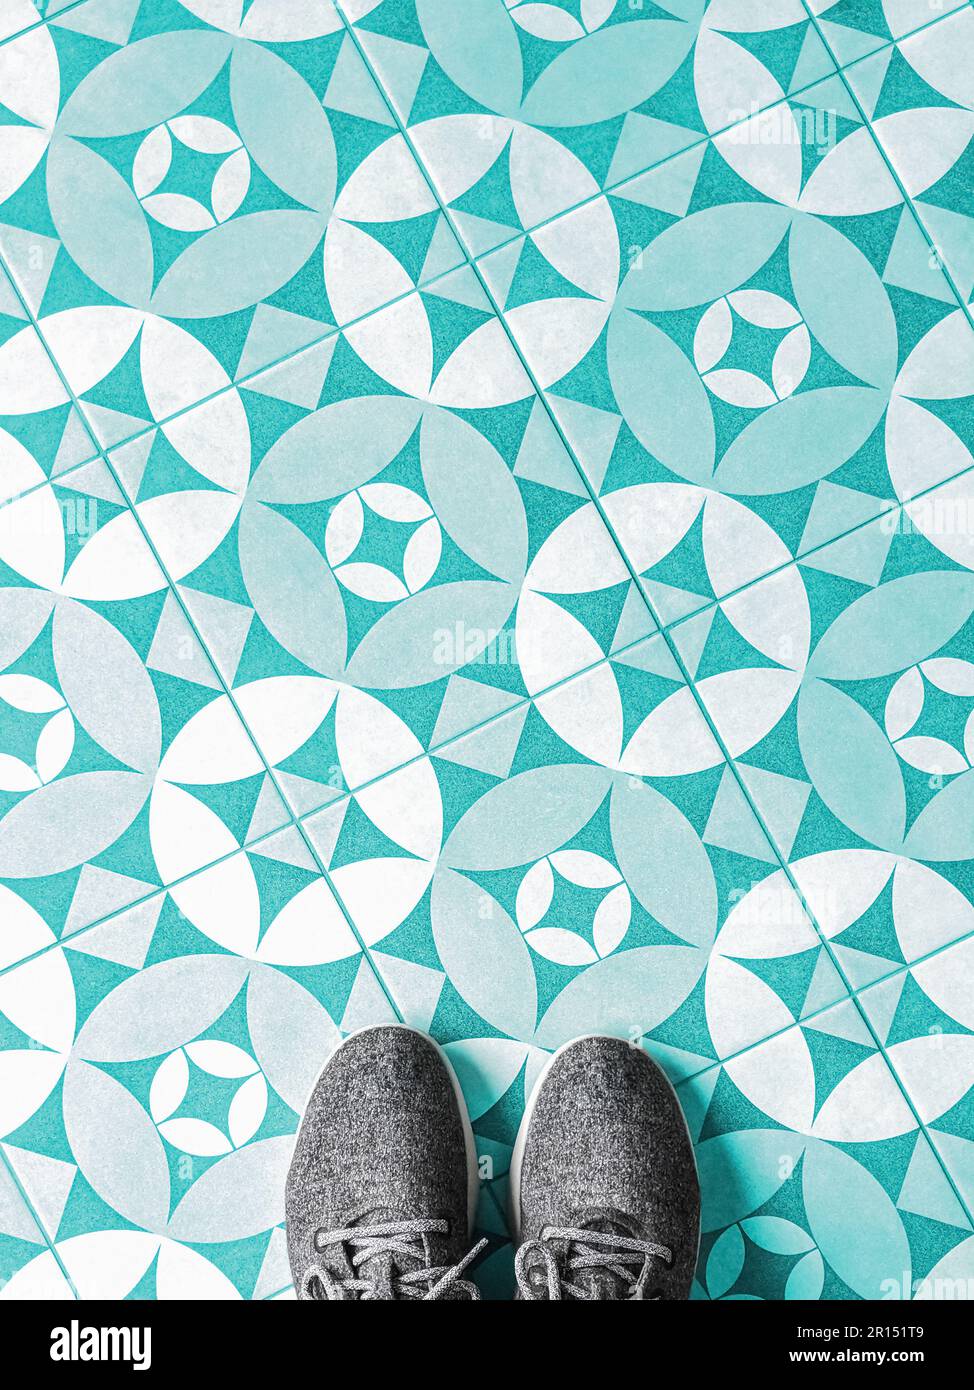 Top view of fabric shoes on a mosaic tile floor with copy space Stock Photo